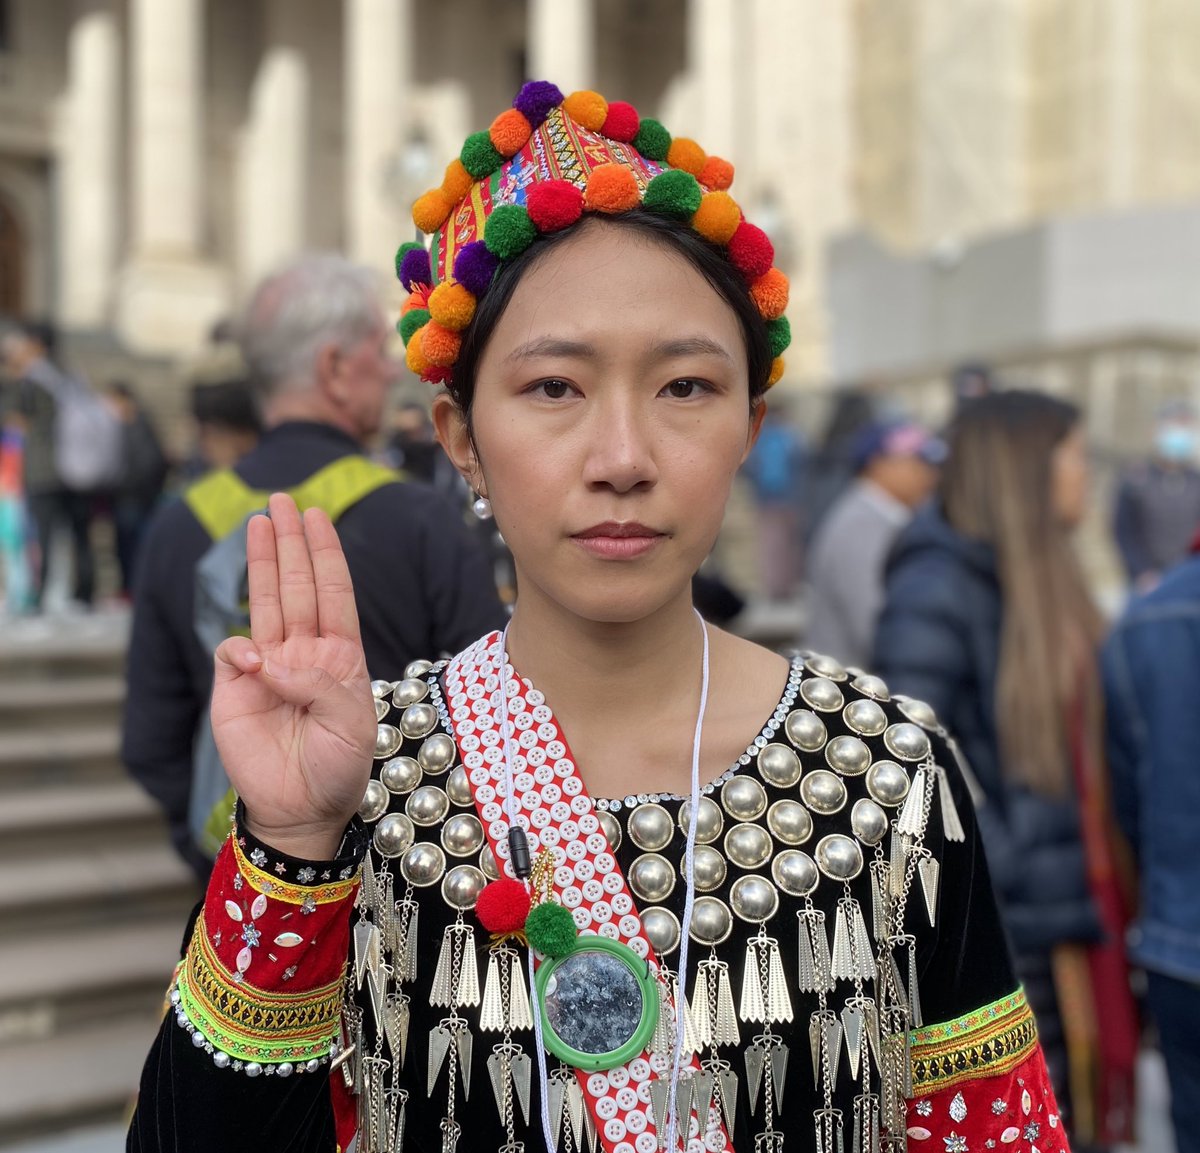 Dai Naw La La is from the Kachin community. ‘We need federal democracy for our people ... Now, we are united all together, to fight to bring the military junta down.’ Her parents are still in Myanmar. ‘They are in a really dangerous situation now.’